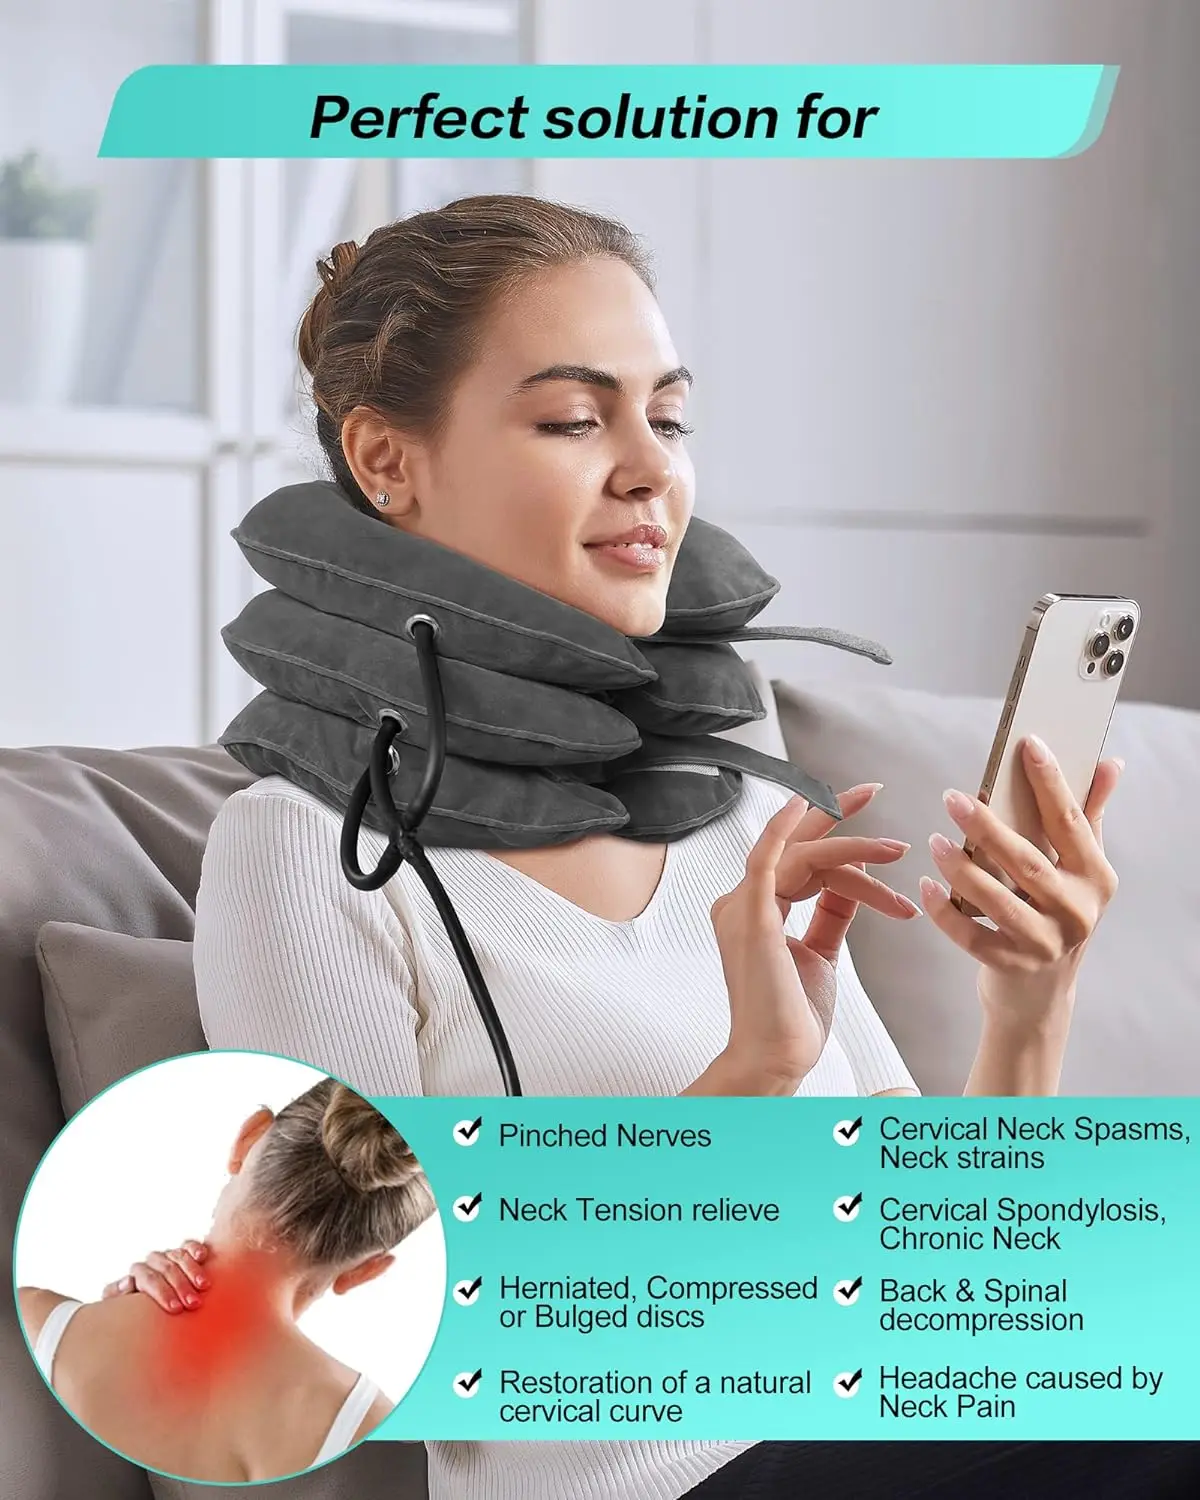 See02b3f4c8e14839acd4981287752acav Cervical Neck Traction Device Relief for Chronic Neck & Shoulder Alignment Pain Inflatable Neck Stretcher Collar